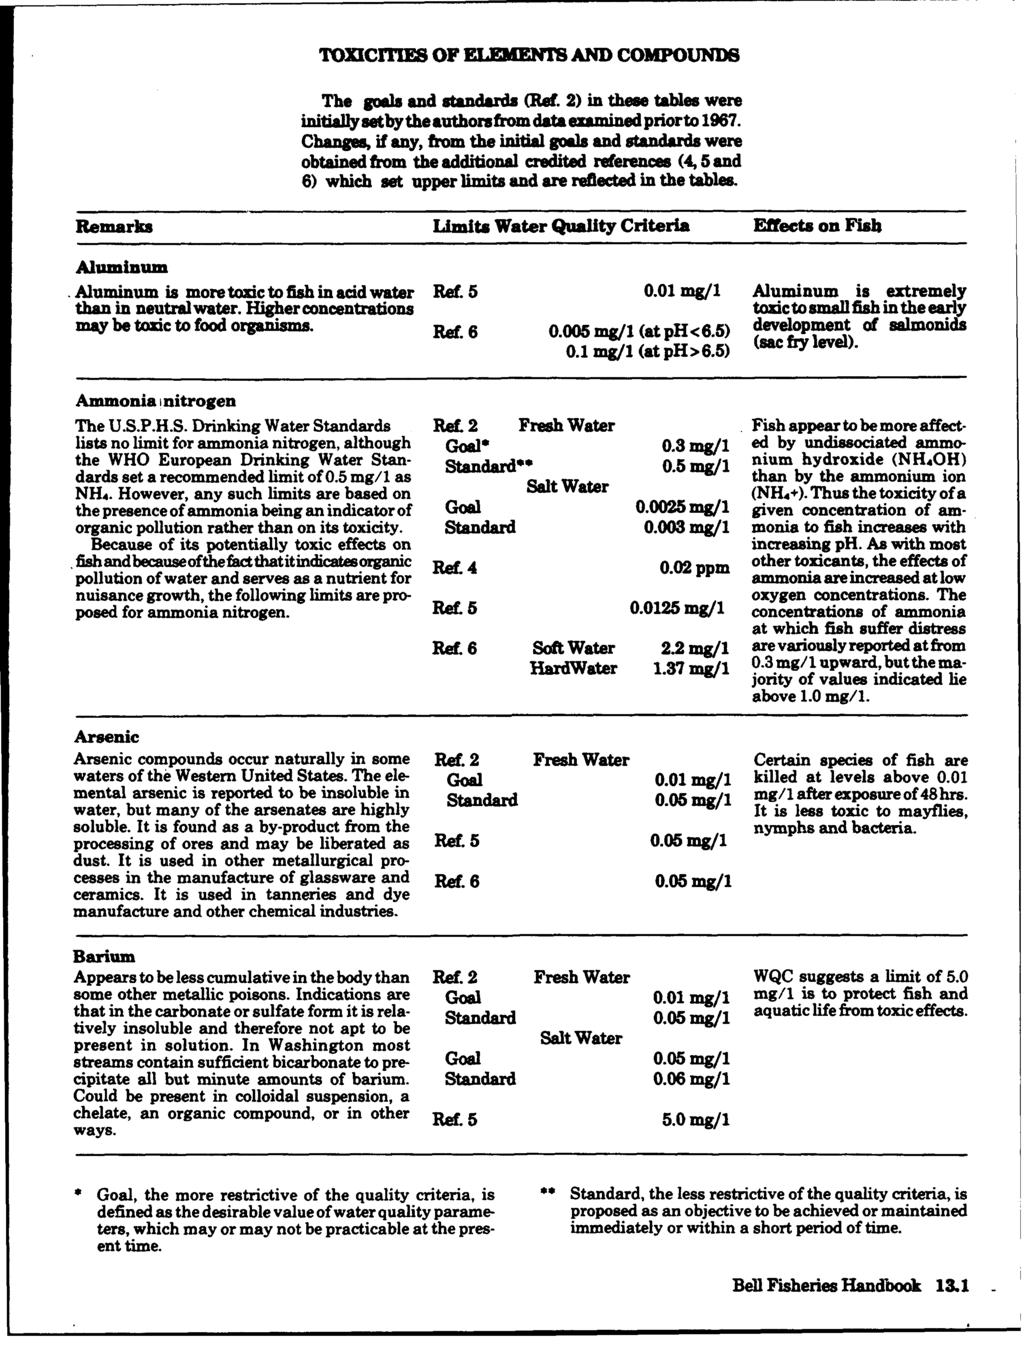 TOXICrrlES OF ELEMENIS AND COMPOUNDS The goals and standards (Ref. 2) in these tables were initially setby the authors from data examined priorto 1967.